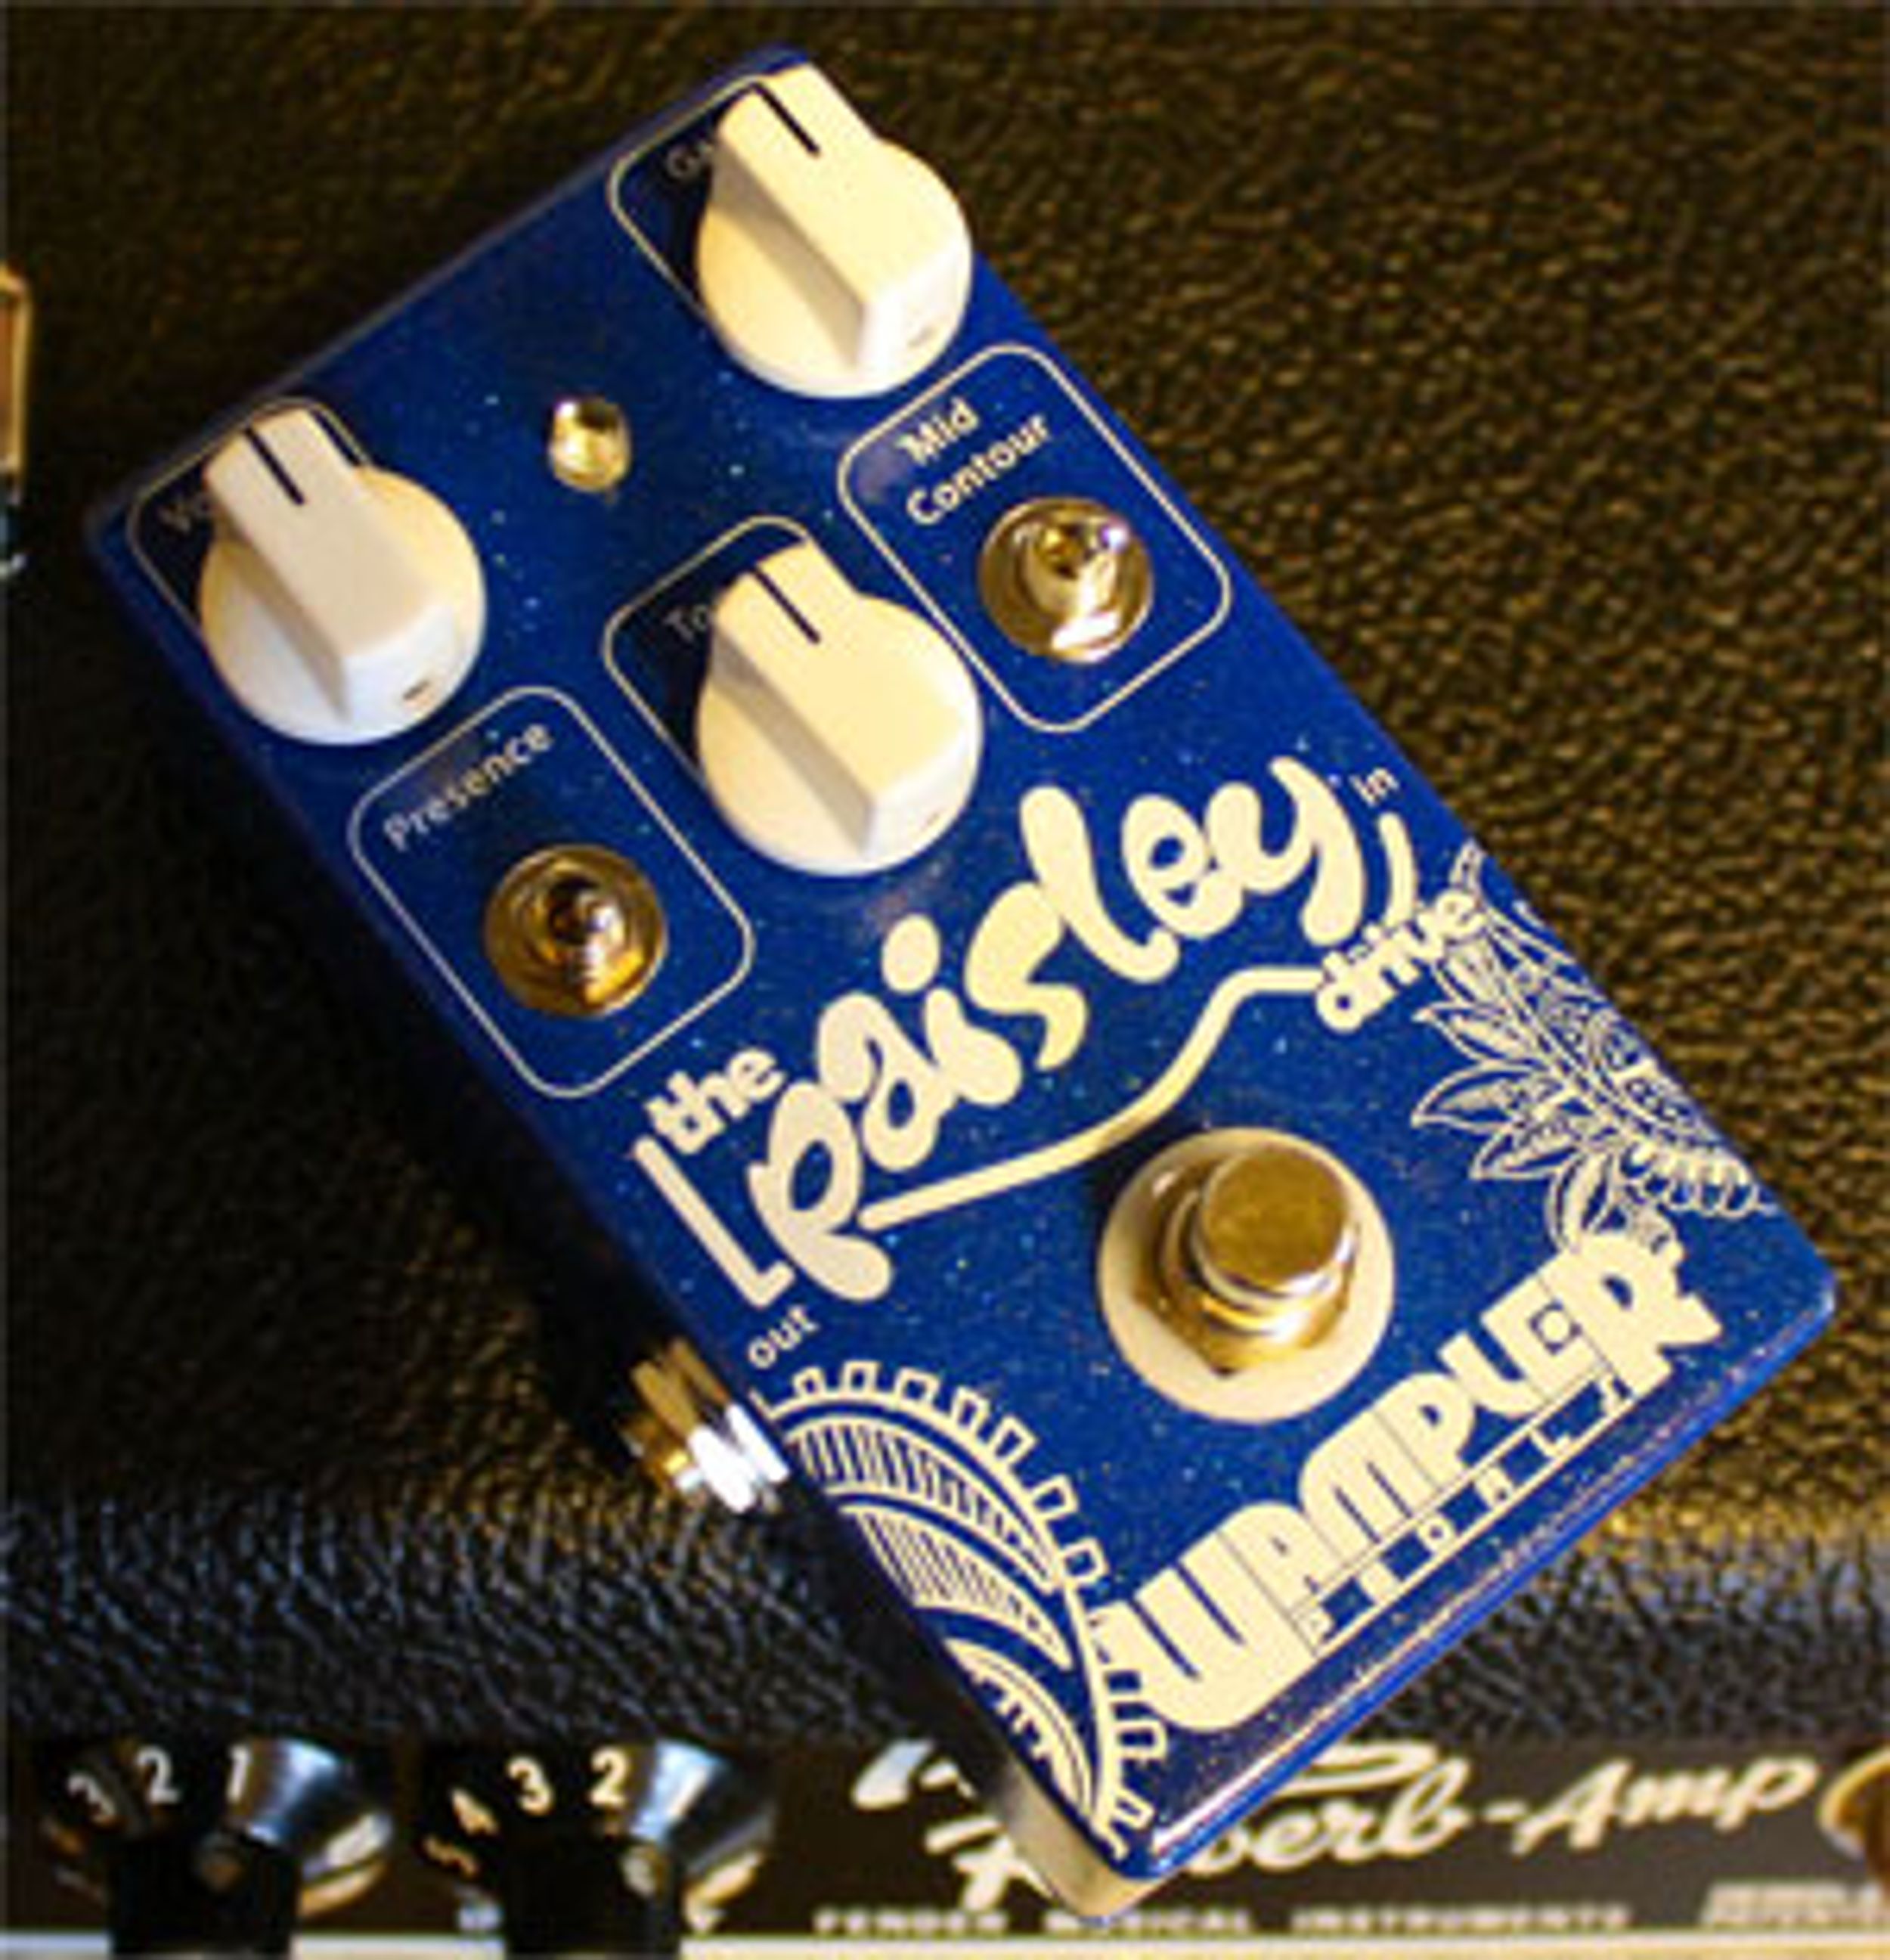 Wampler Pedals Releases Paisley Drive